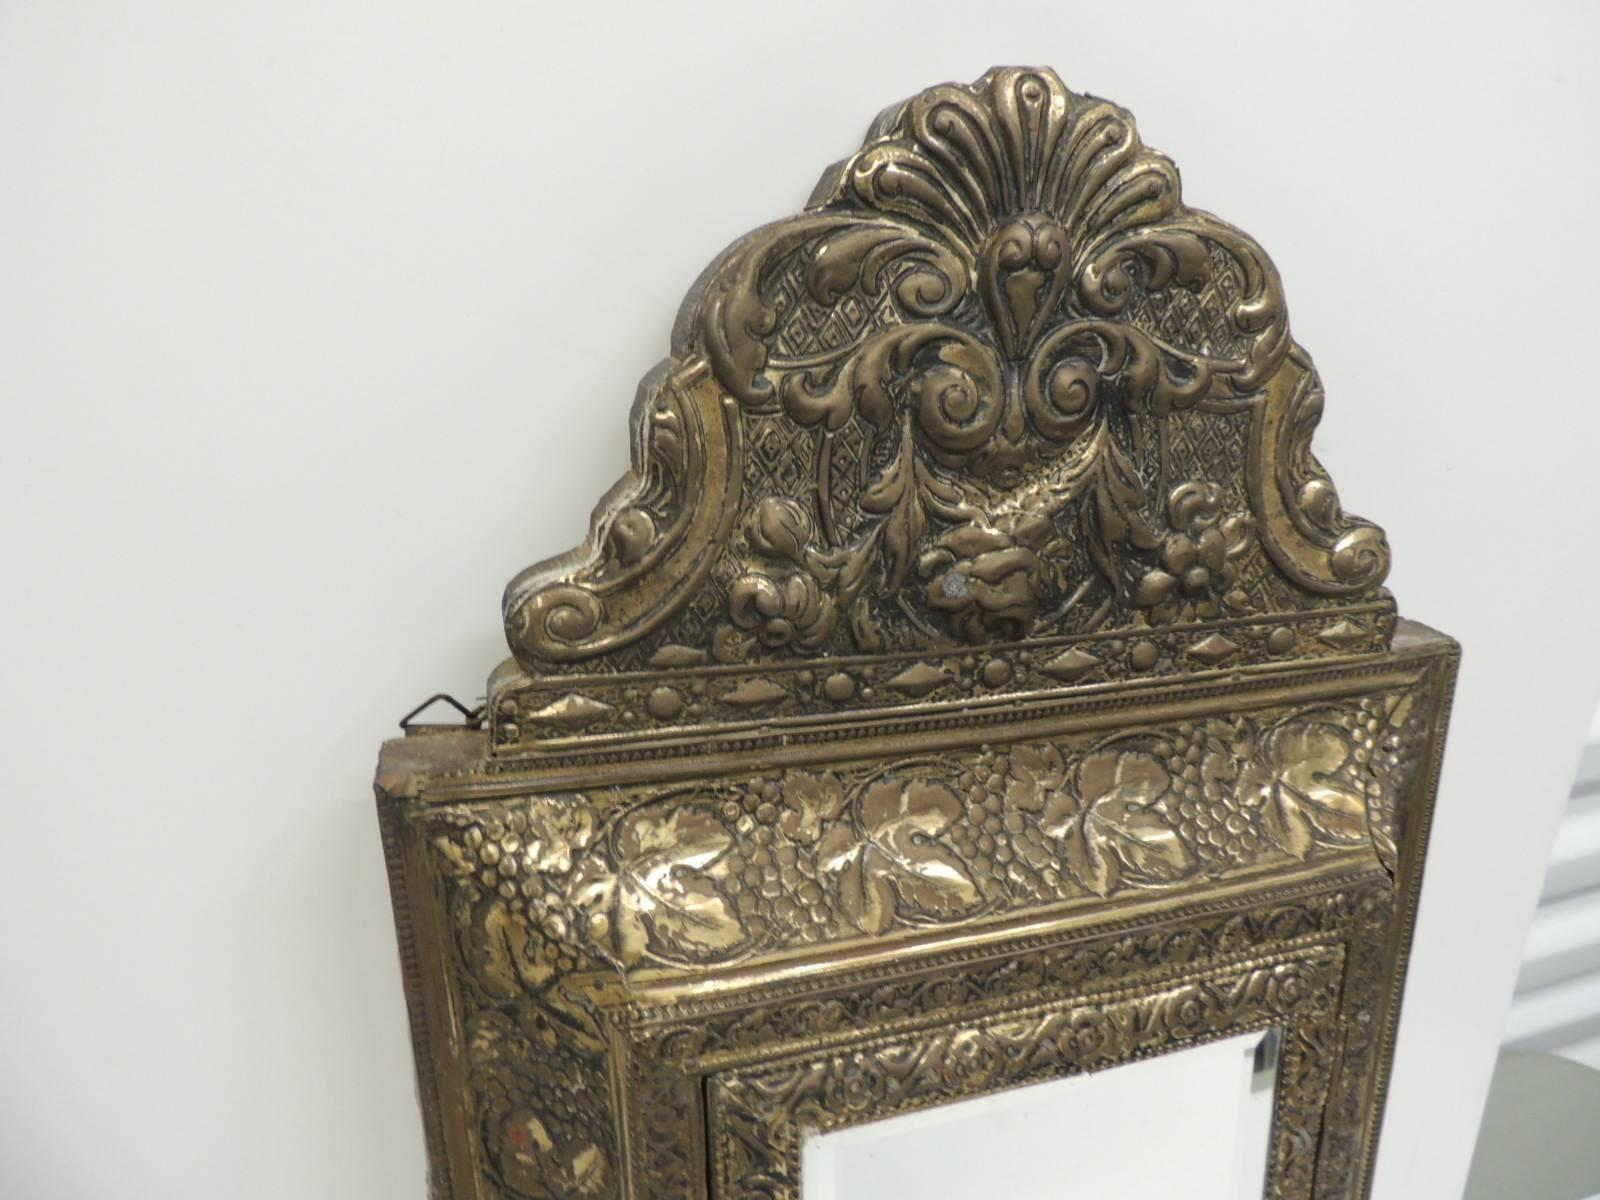 Offered by the Antique Textiles Galleries:
Antique embossed brass vanity reliquary with mirrored door and coat brushes.
Antique repose vanity reliquary in brass relief with mirrored door encasing a set of two coat brushes. Brass on wood and the